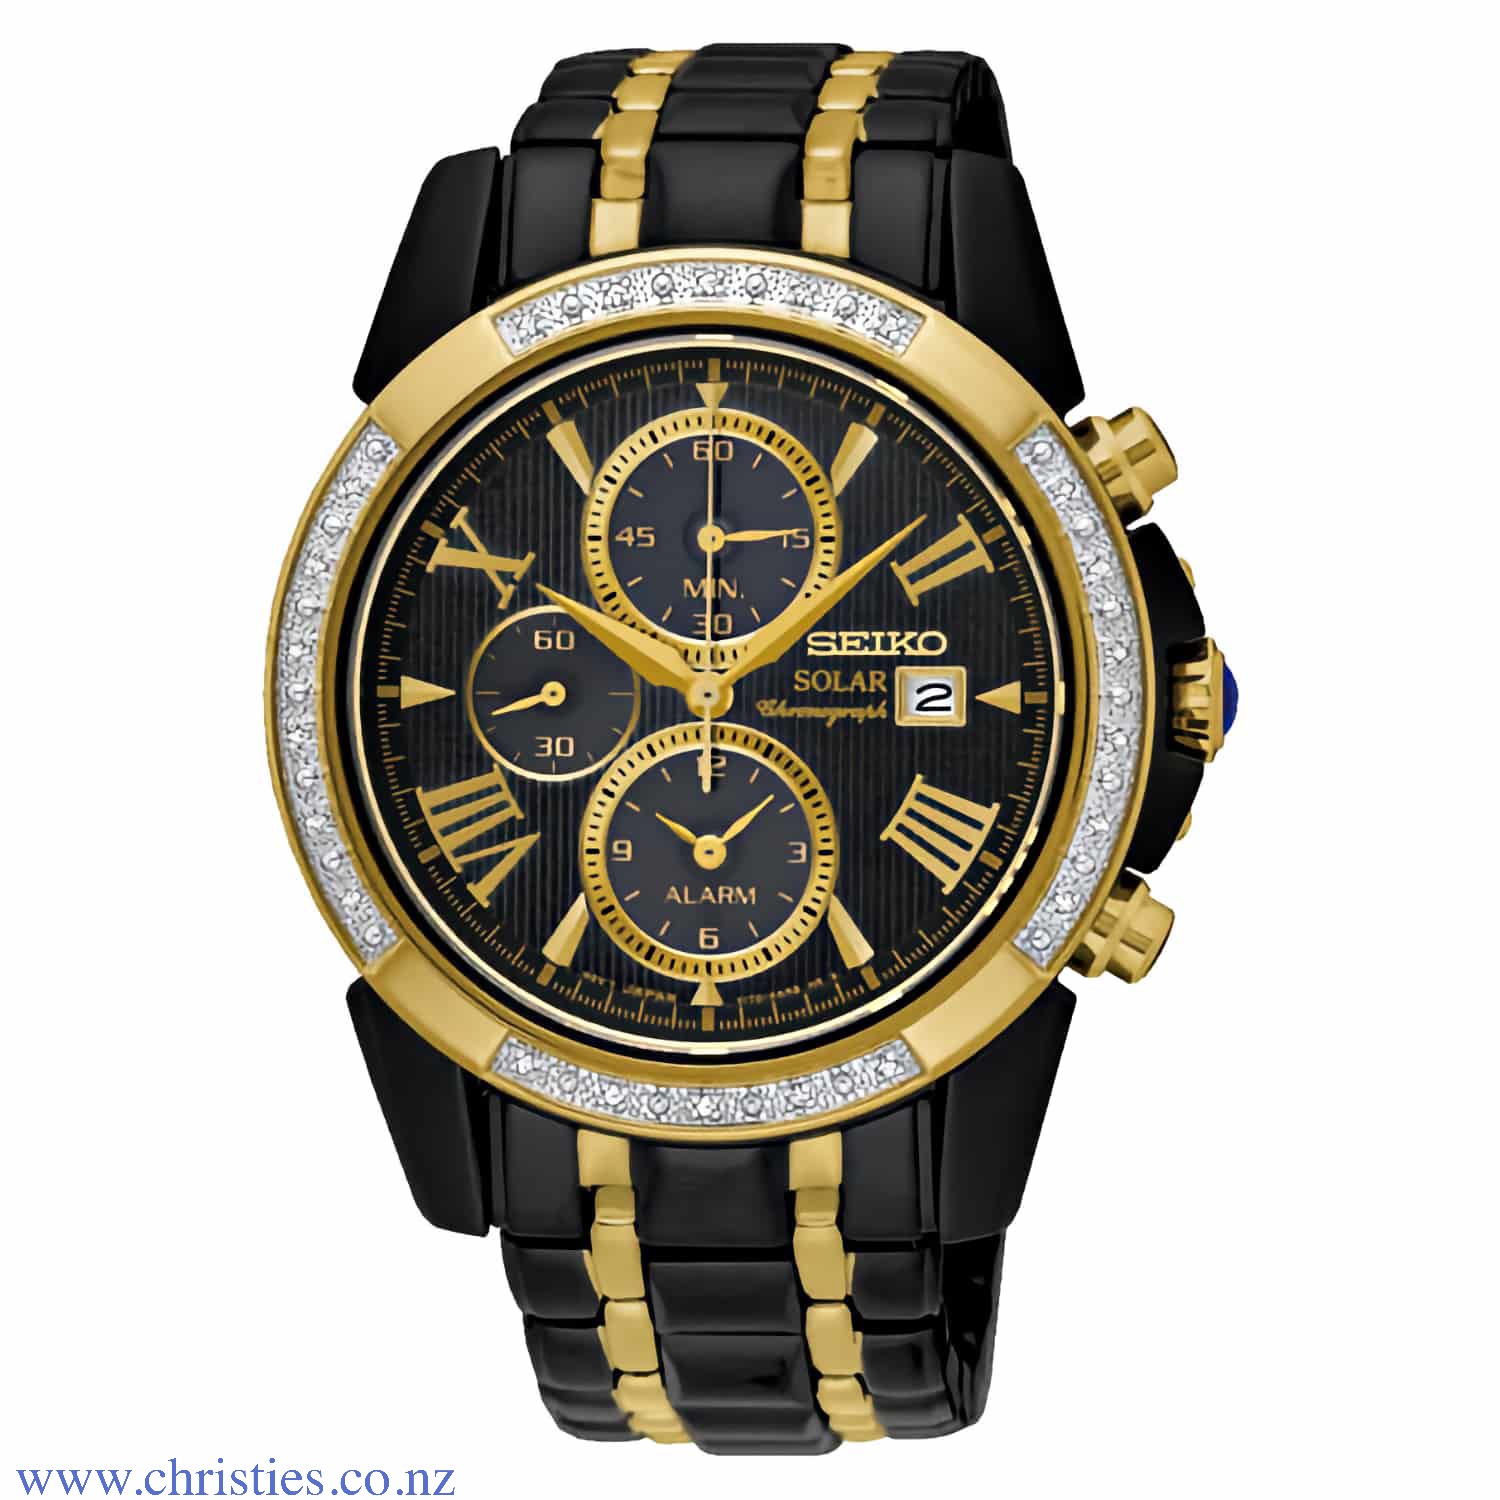 SSC514P Seiko Le Grand Solar Sport Mens Diamond Watch. SSC514P Seiko Le Grand Solar Sports Mens Diamond Set Watch Afterpay - Split your purchase into 4 instalments - Pay for your purchase over 4 instalments, due every two weeks. You’ll pay your first inst